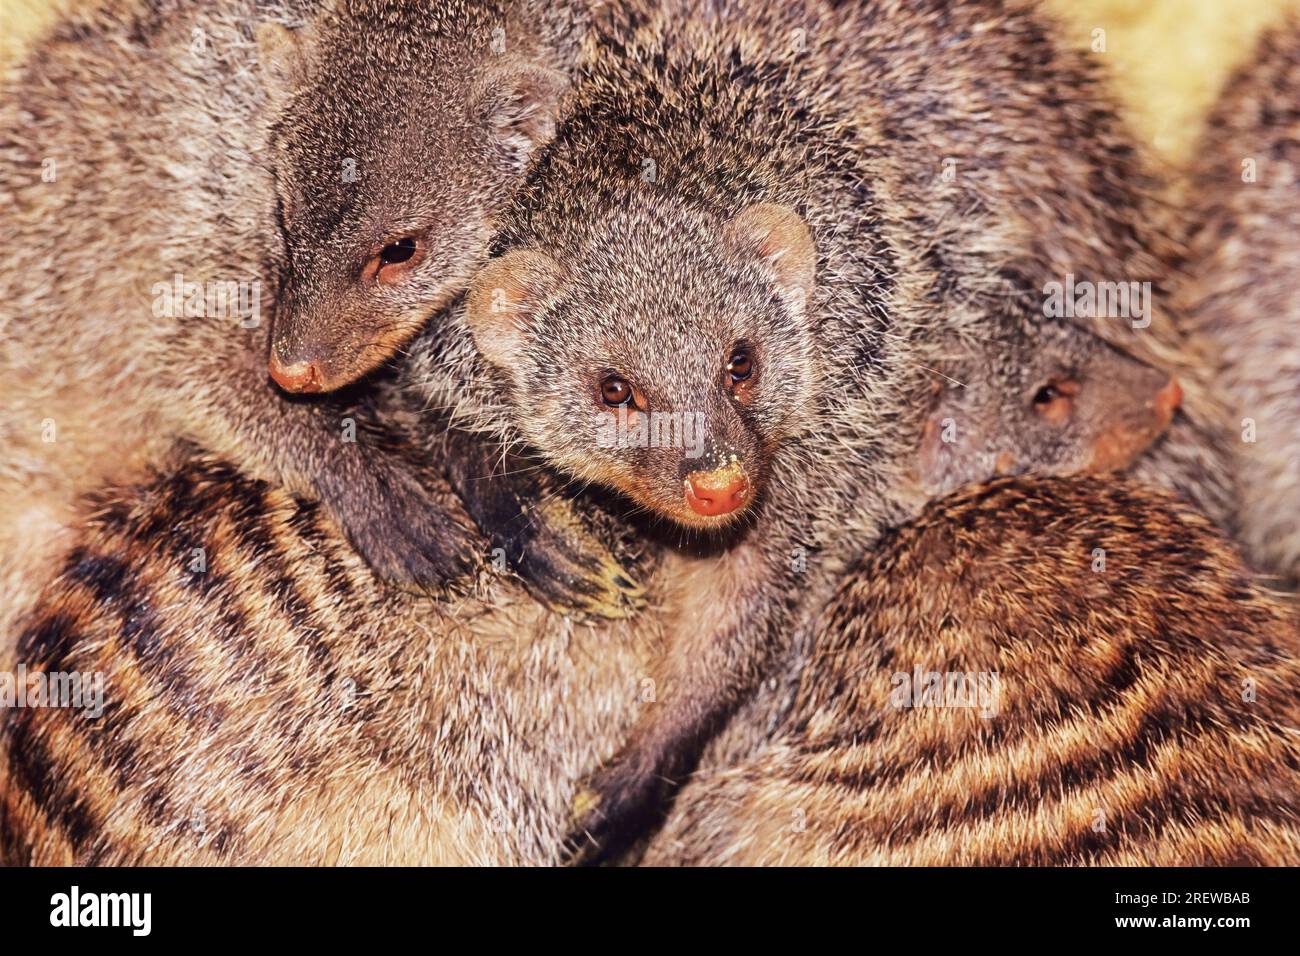 The banded mongoose (Mungos mungo) is a mongoose species native from the Sahel to Southern Africa. Stock Photo